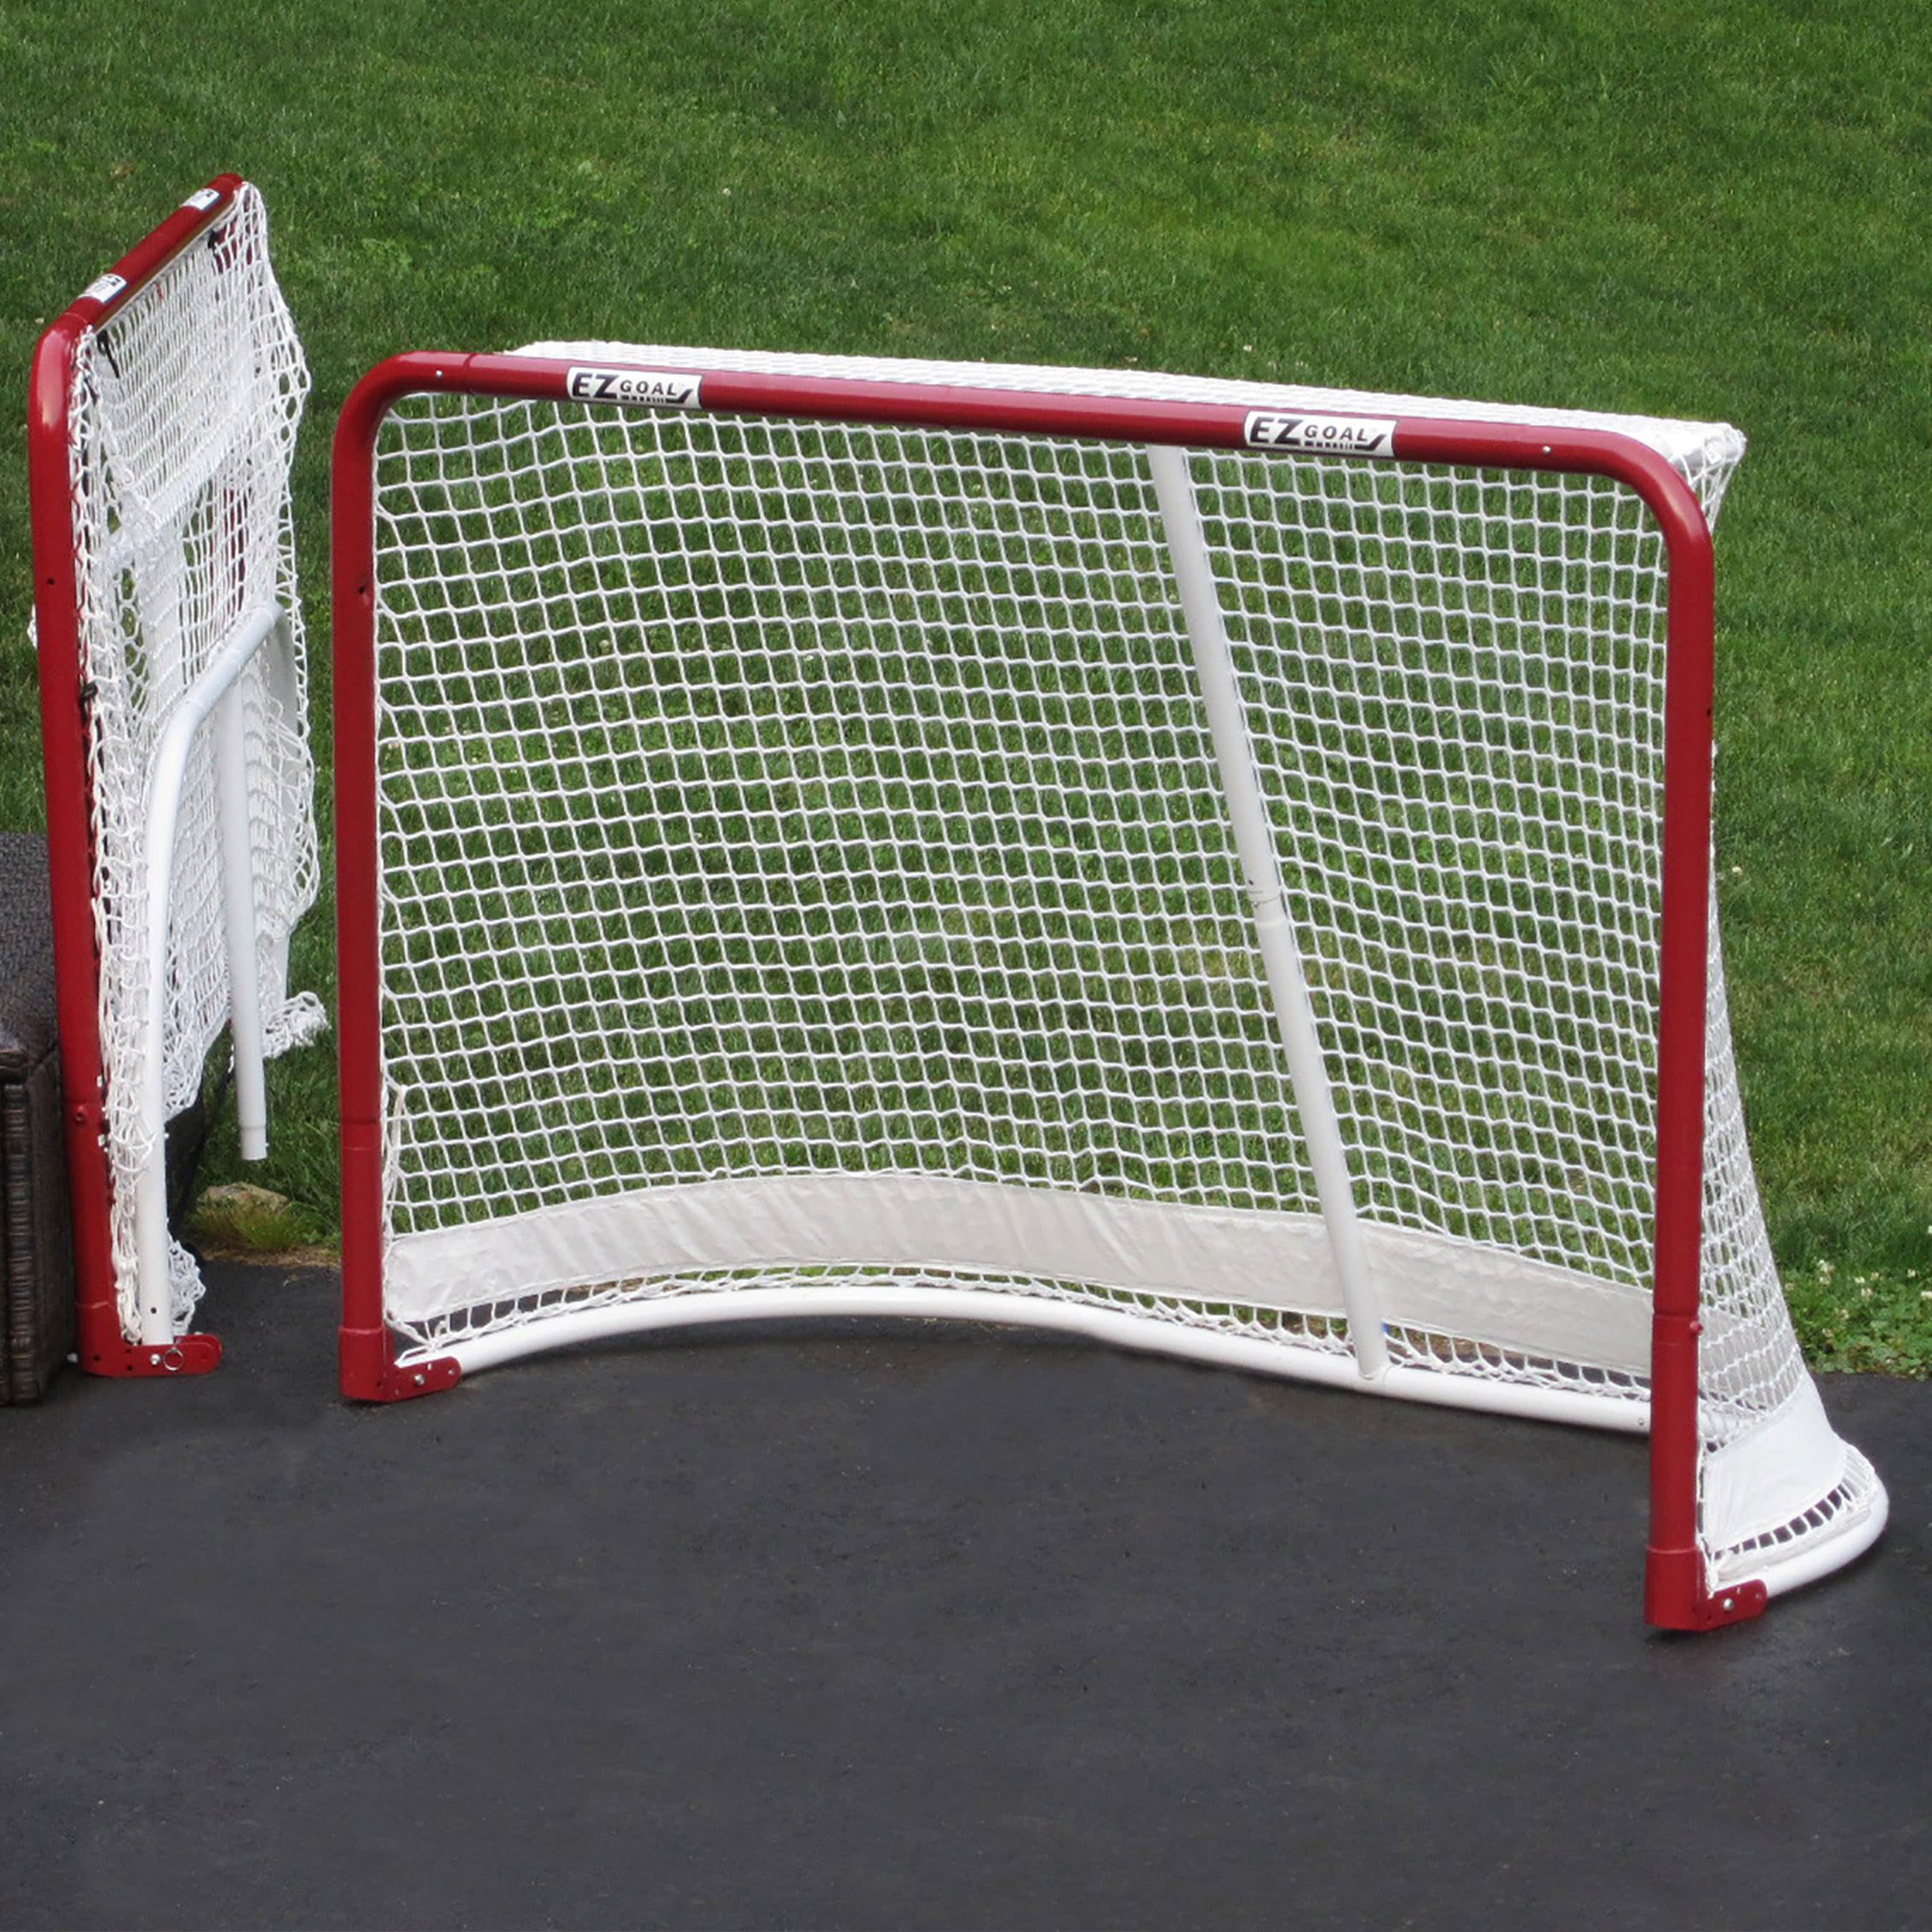 Details about   72Lx48H Goal Net with Backstop Portable Folding Regulation Size Hockey Training 